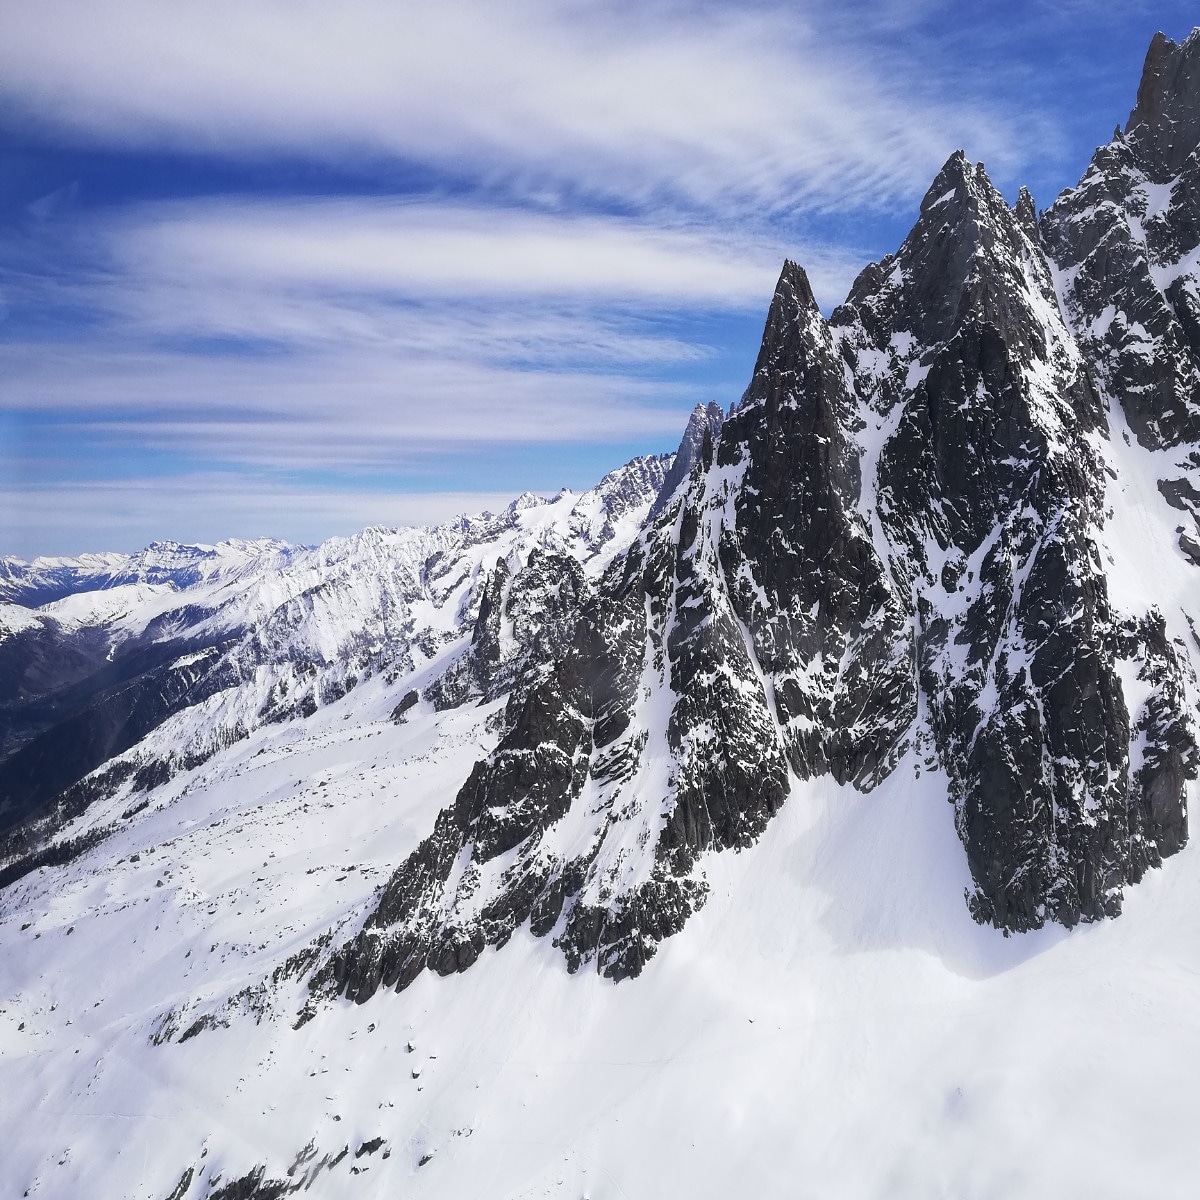 The peaks seen in Chamonix from Alguille du Midi platform. The trip with the cable car is stunning.

traveltoland.com 

#traveltoland #chamonix #cablecar #alps #frenchalps #mountainview #mountains #worldtraveler #france🇫🇷 #discoverfrance #discoverchamonix